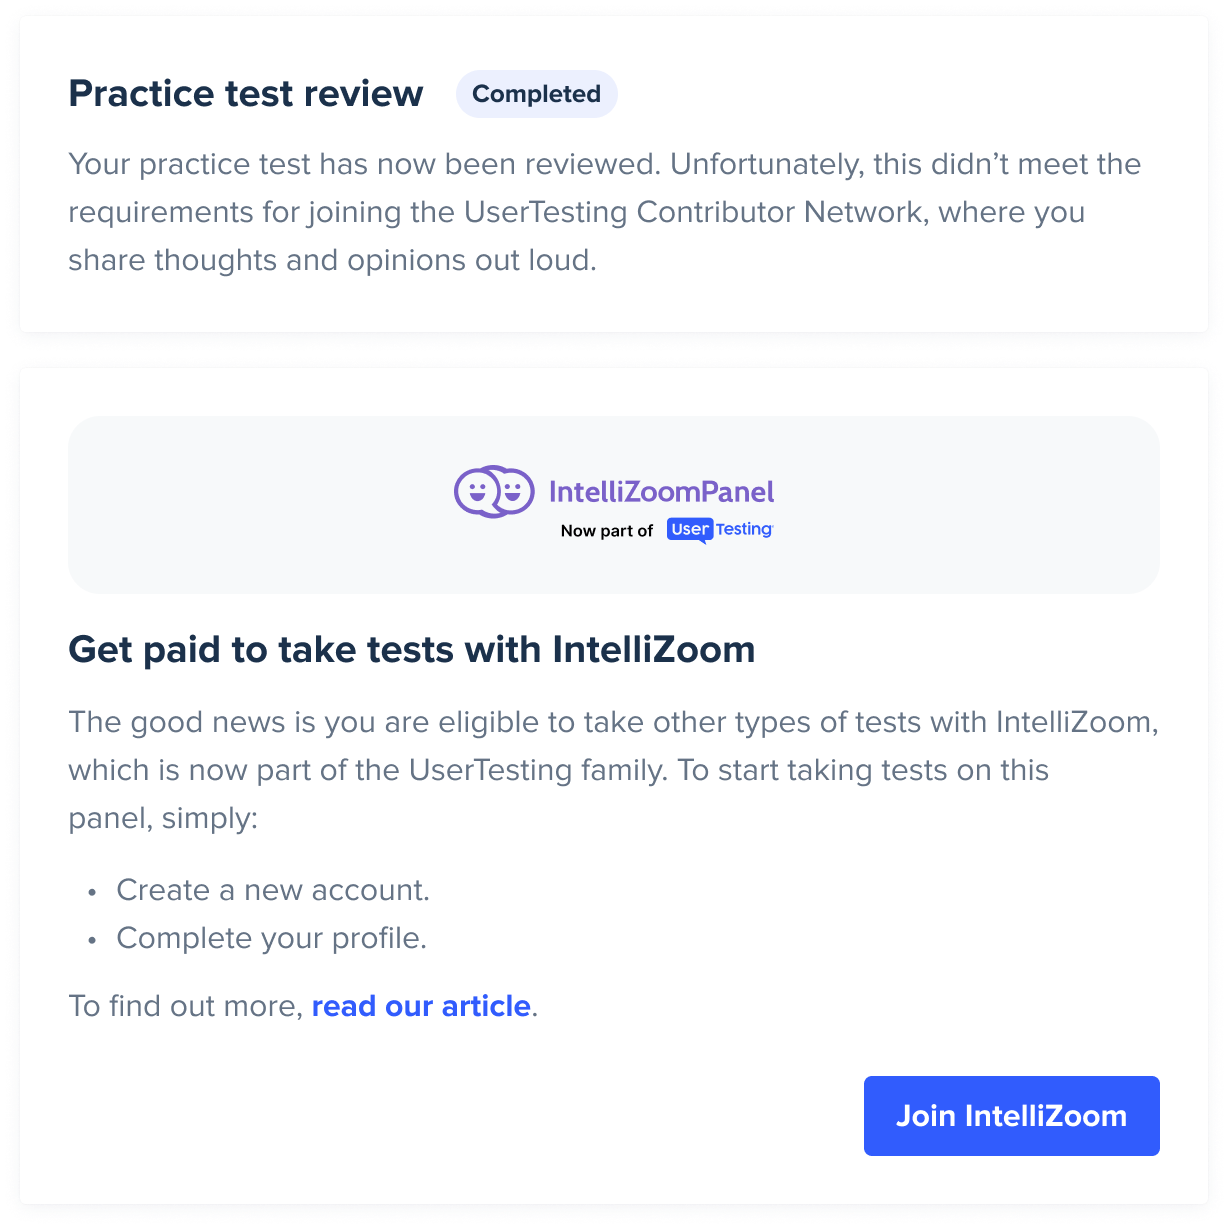 A screenshot of the dashboard invitation to join the IntelliZoom panel. The invitation contains an explainer that the applicant hasn't passed the practice test. There is a button available to Join Intellizoom